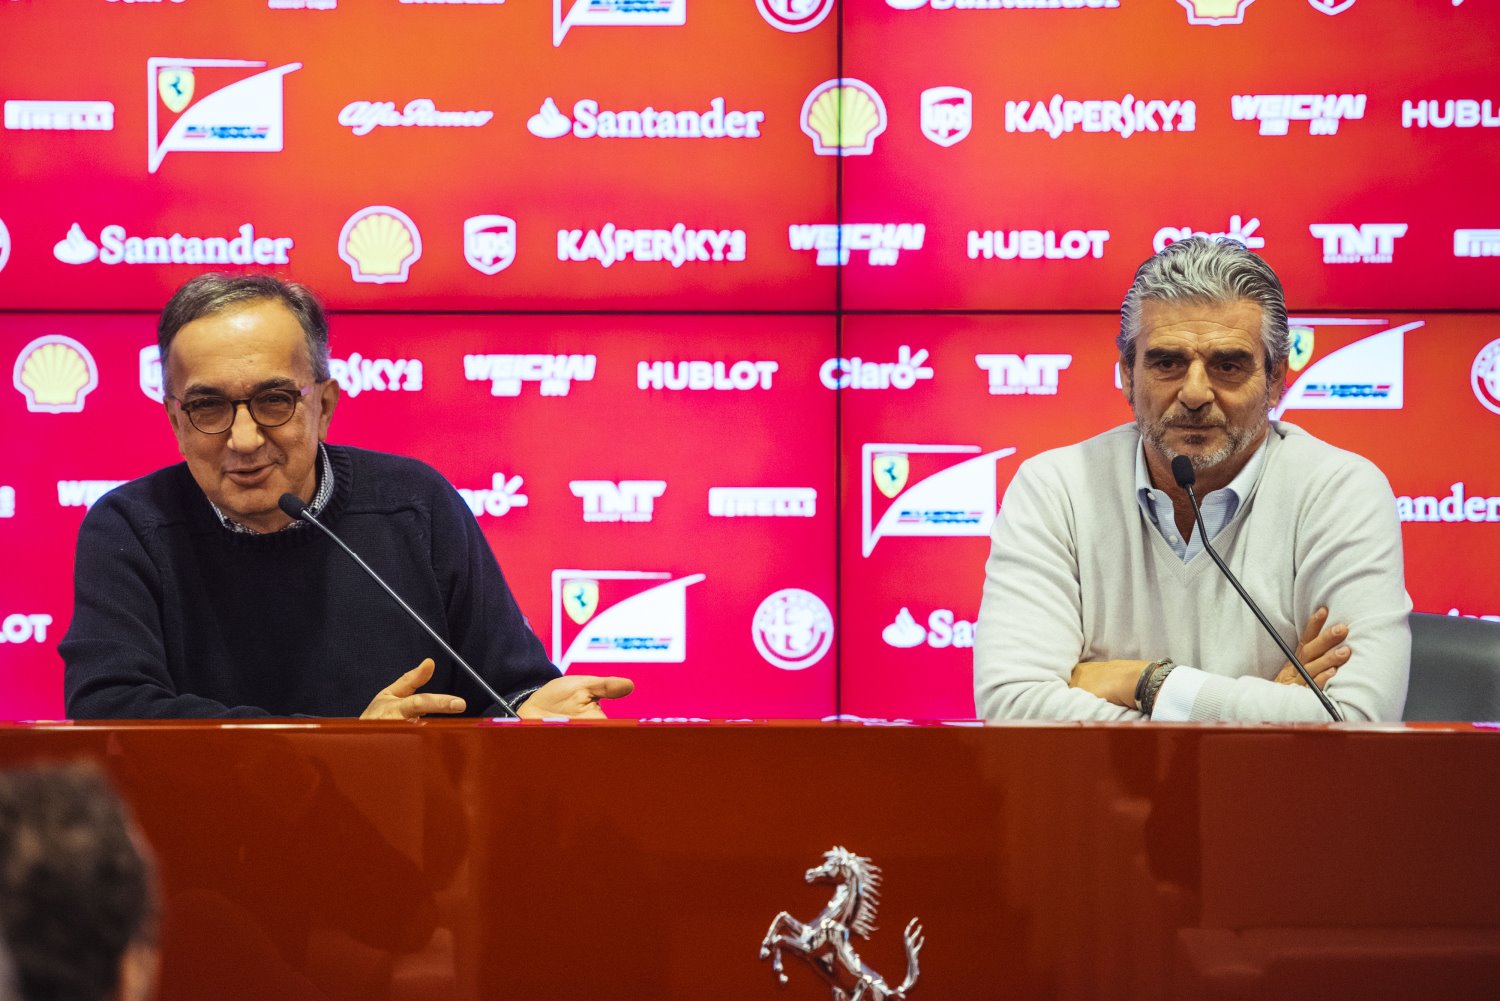 Sergio Marchionne (L) and Mauricio Arrivabene meet the press before Christmas